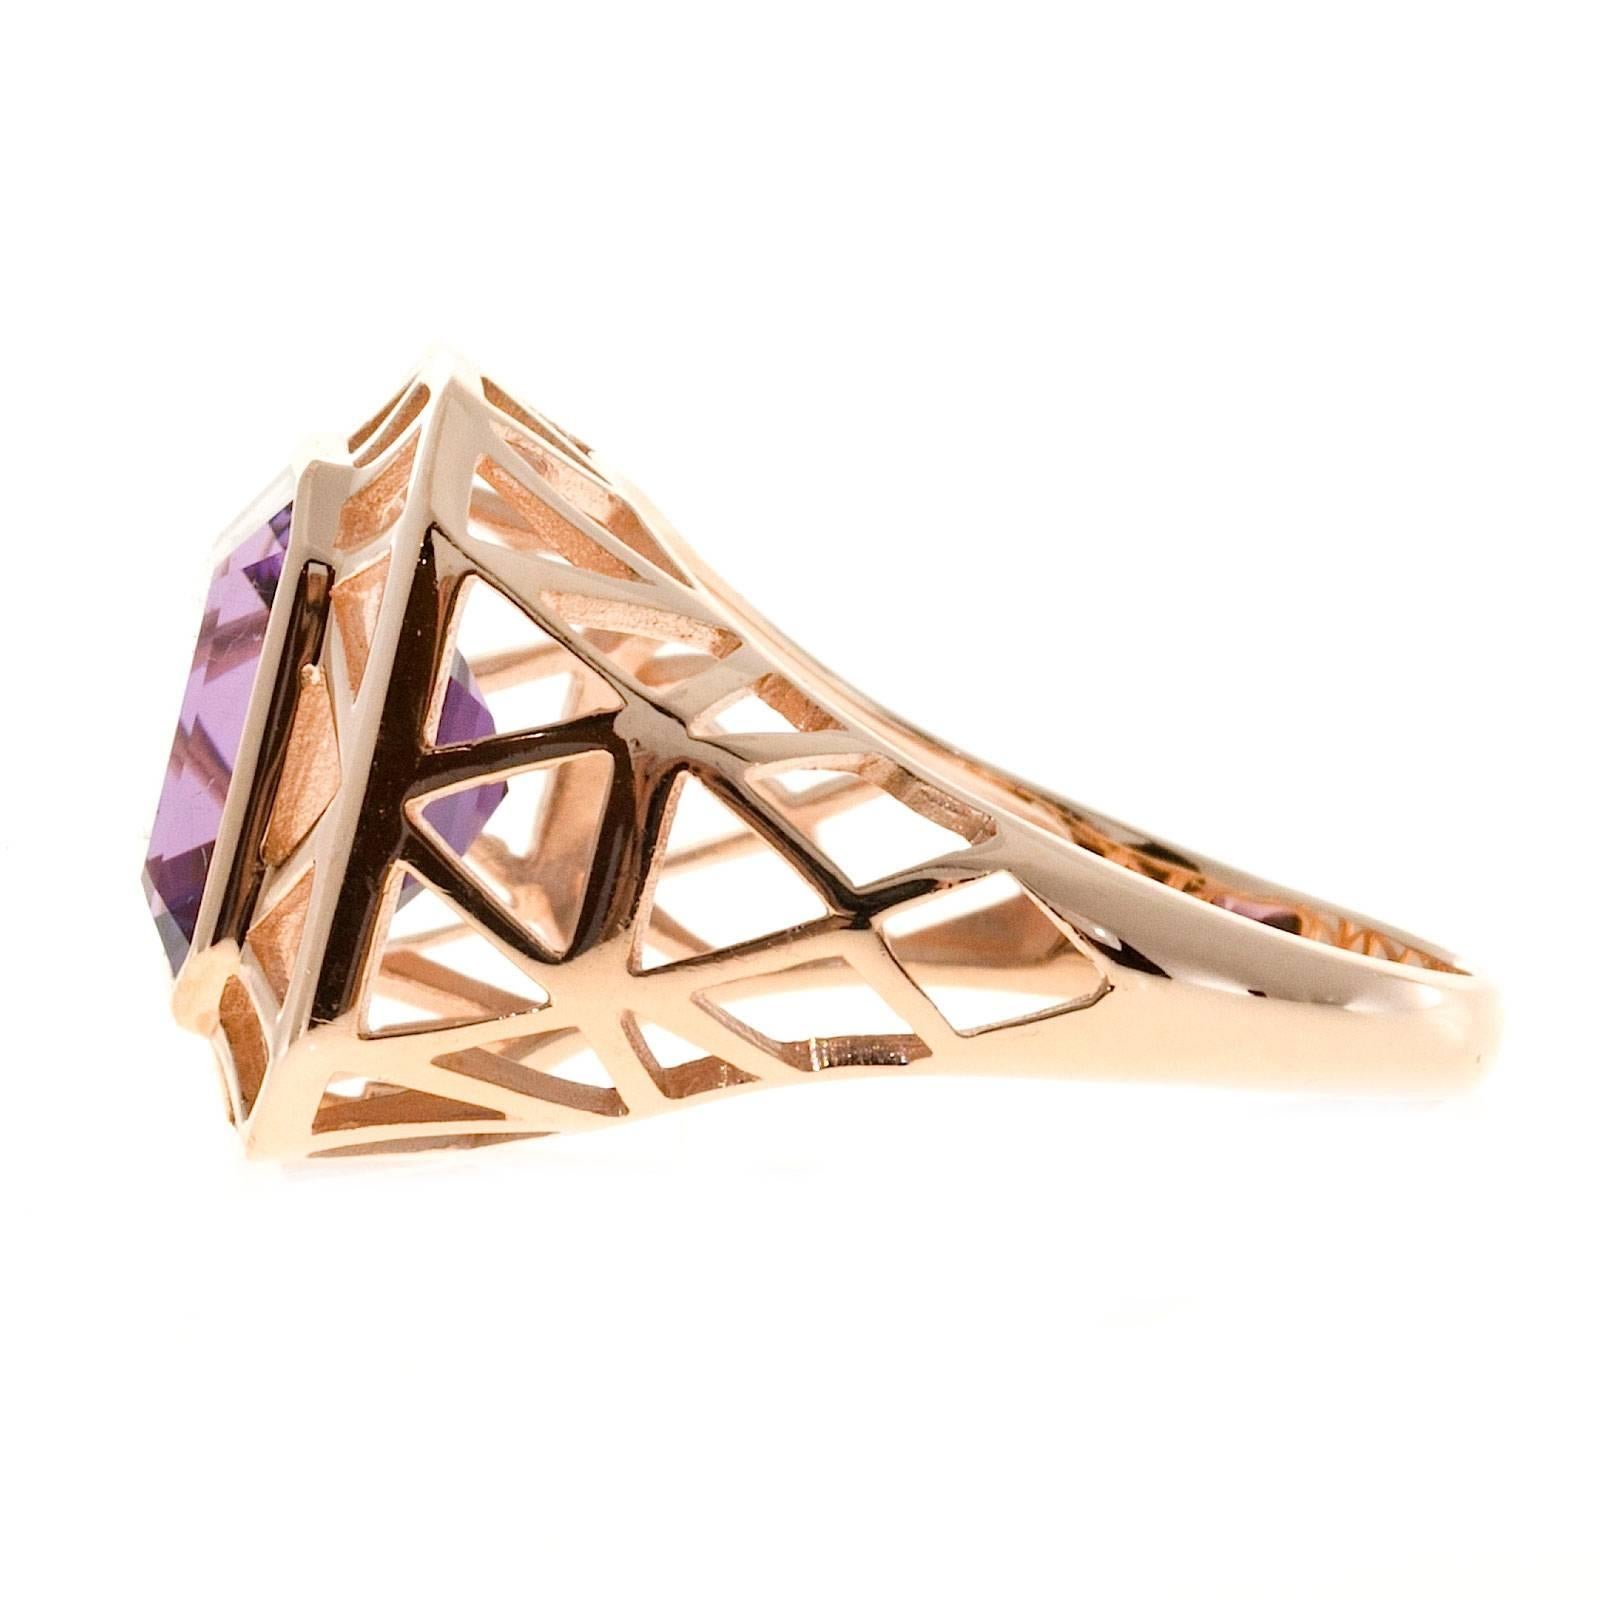 Medium purple Amethyst ring.

1 medium purple Amethyst, approx. total weight 4.20cts, VS
14k Rose gold
Tested and stamped: 14k
4.9 grams
Width at top: 15.4mm
Height at top: 7mm
Width at bottom: 2.3mm
Size 8 and sizable
